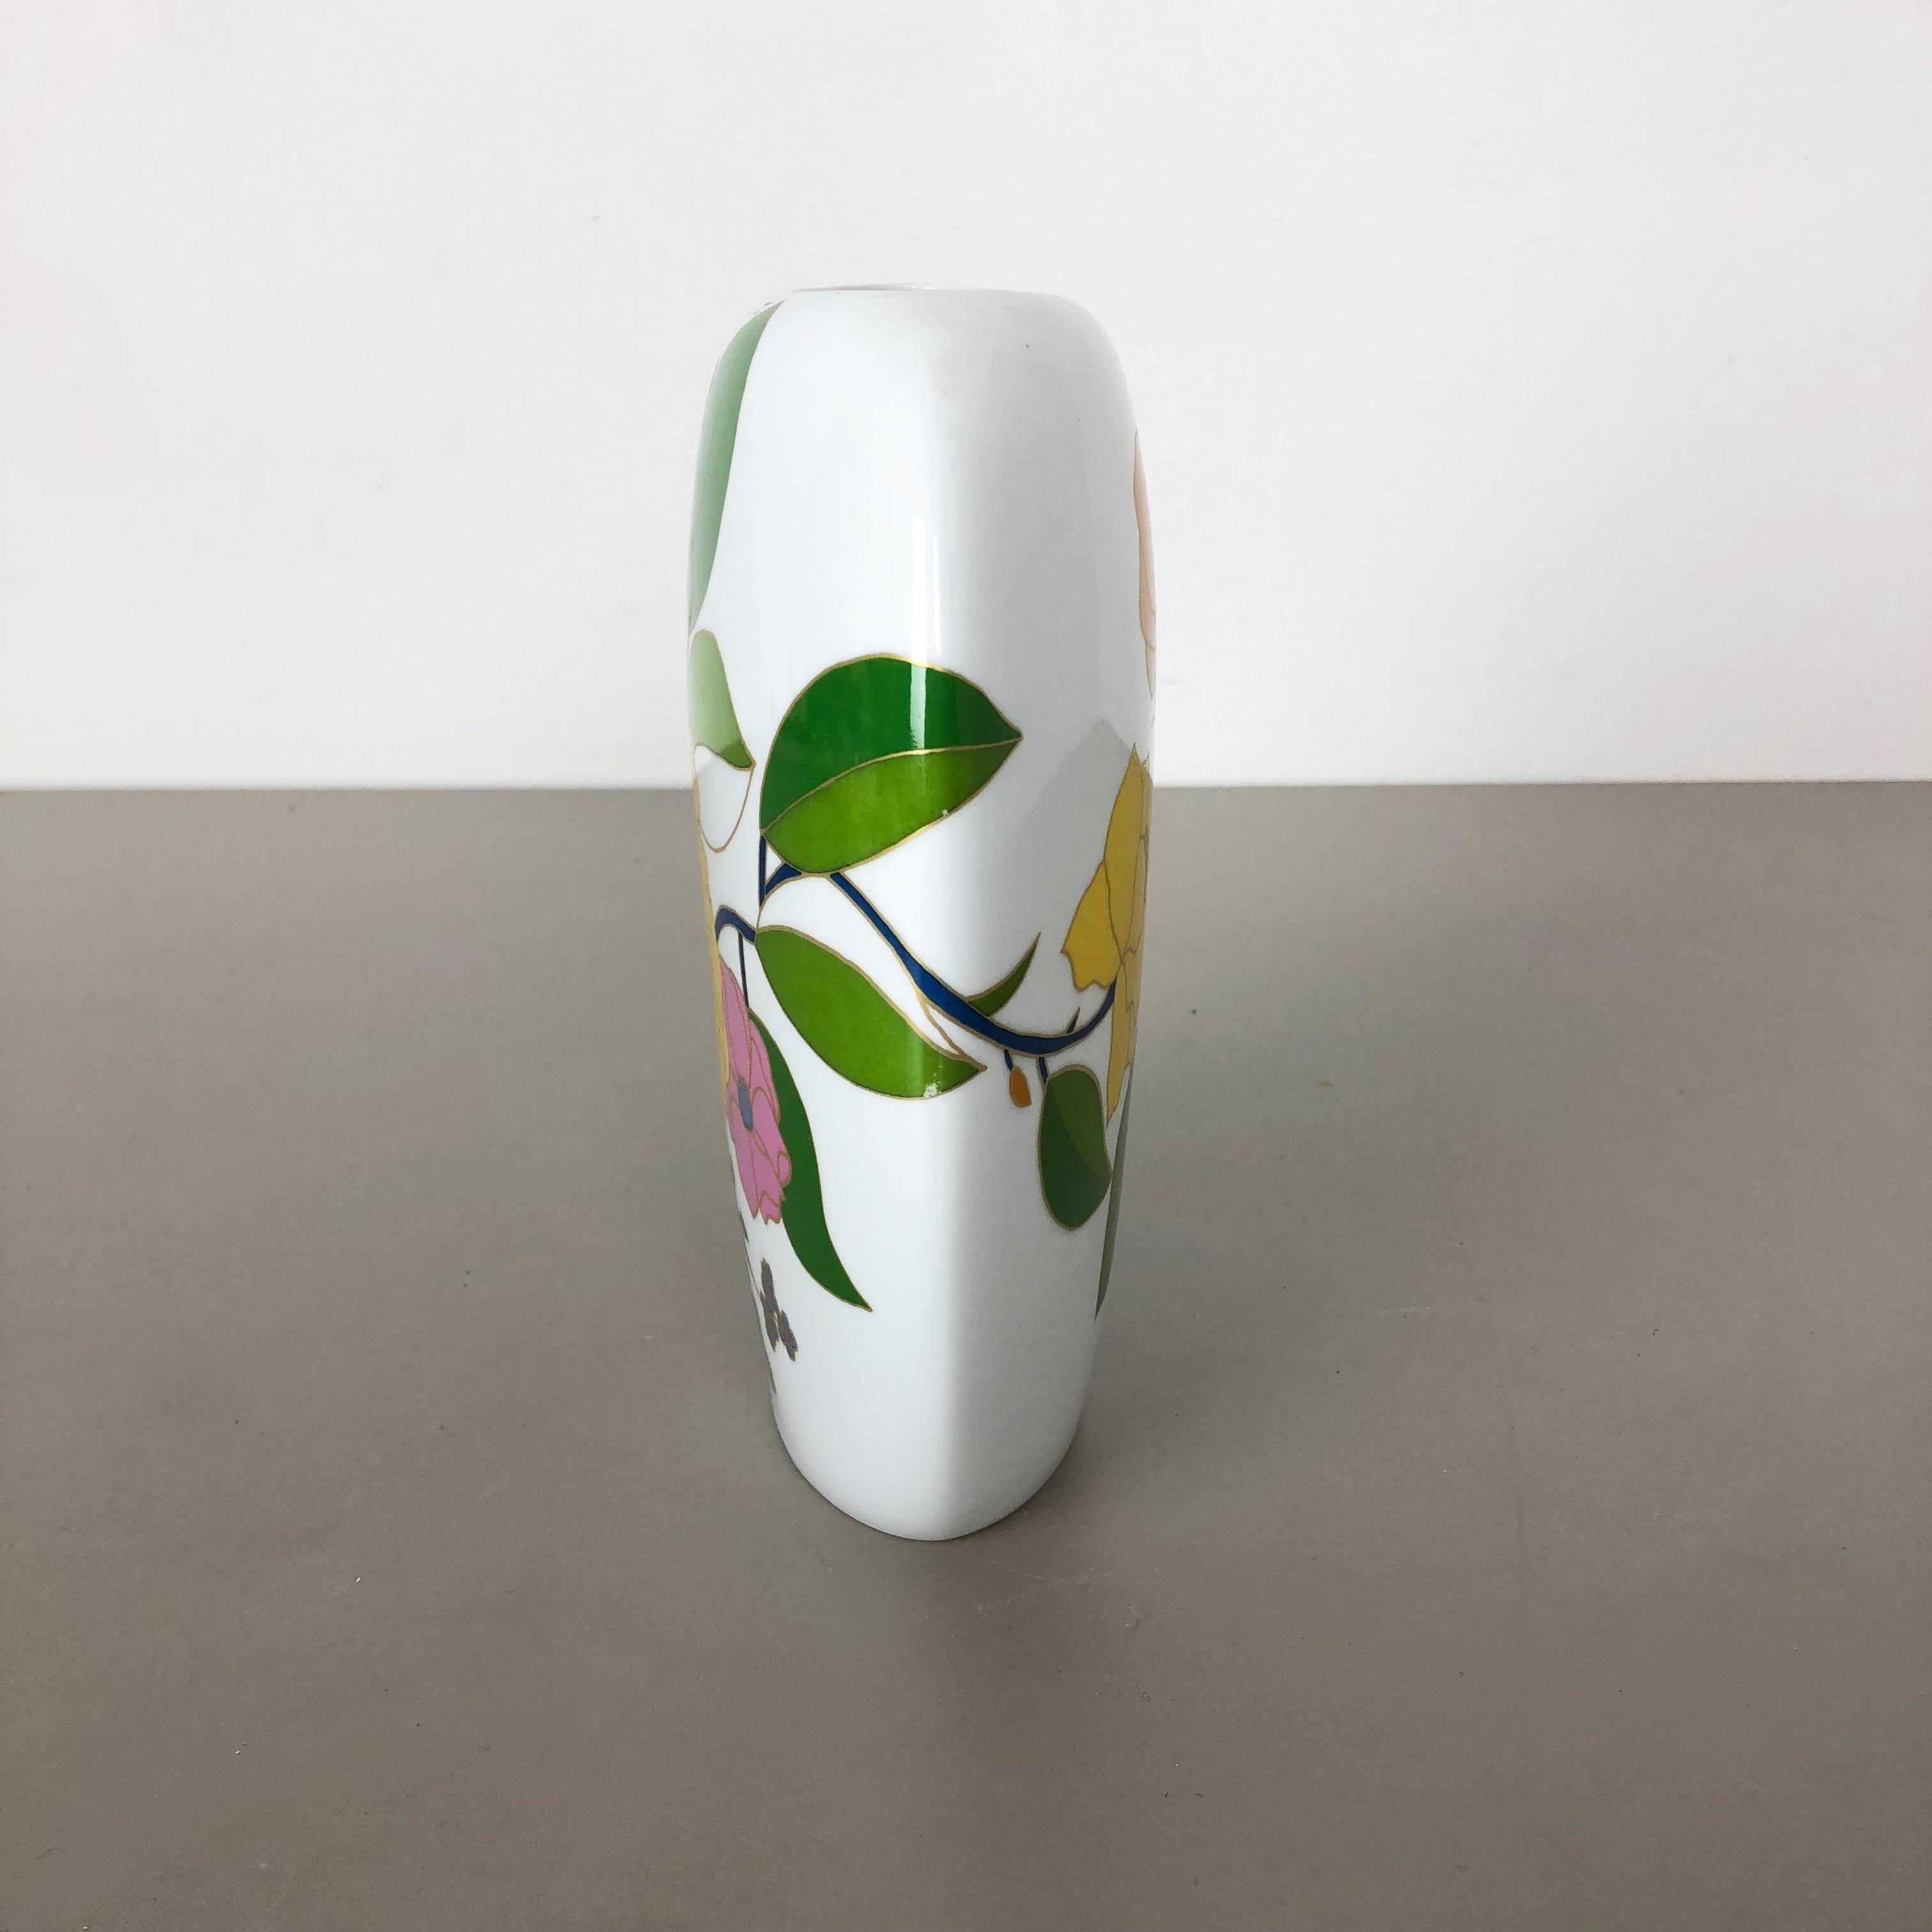 20th Century Colorful 1970s Art Vase Floral Porcelain Vase by W. Bauer for Rosenthal, Germany